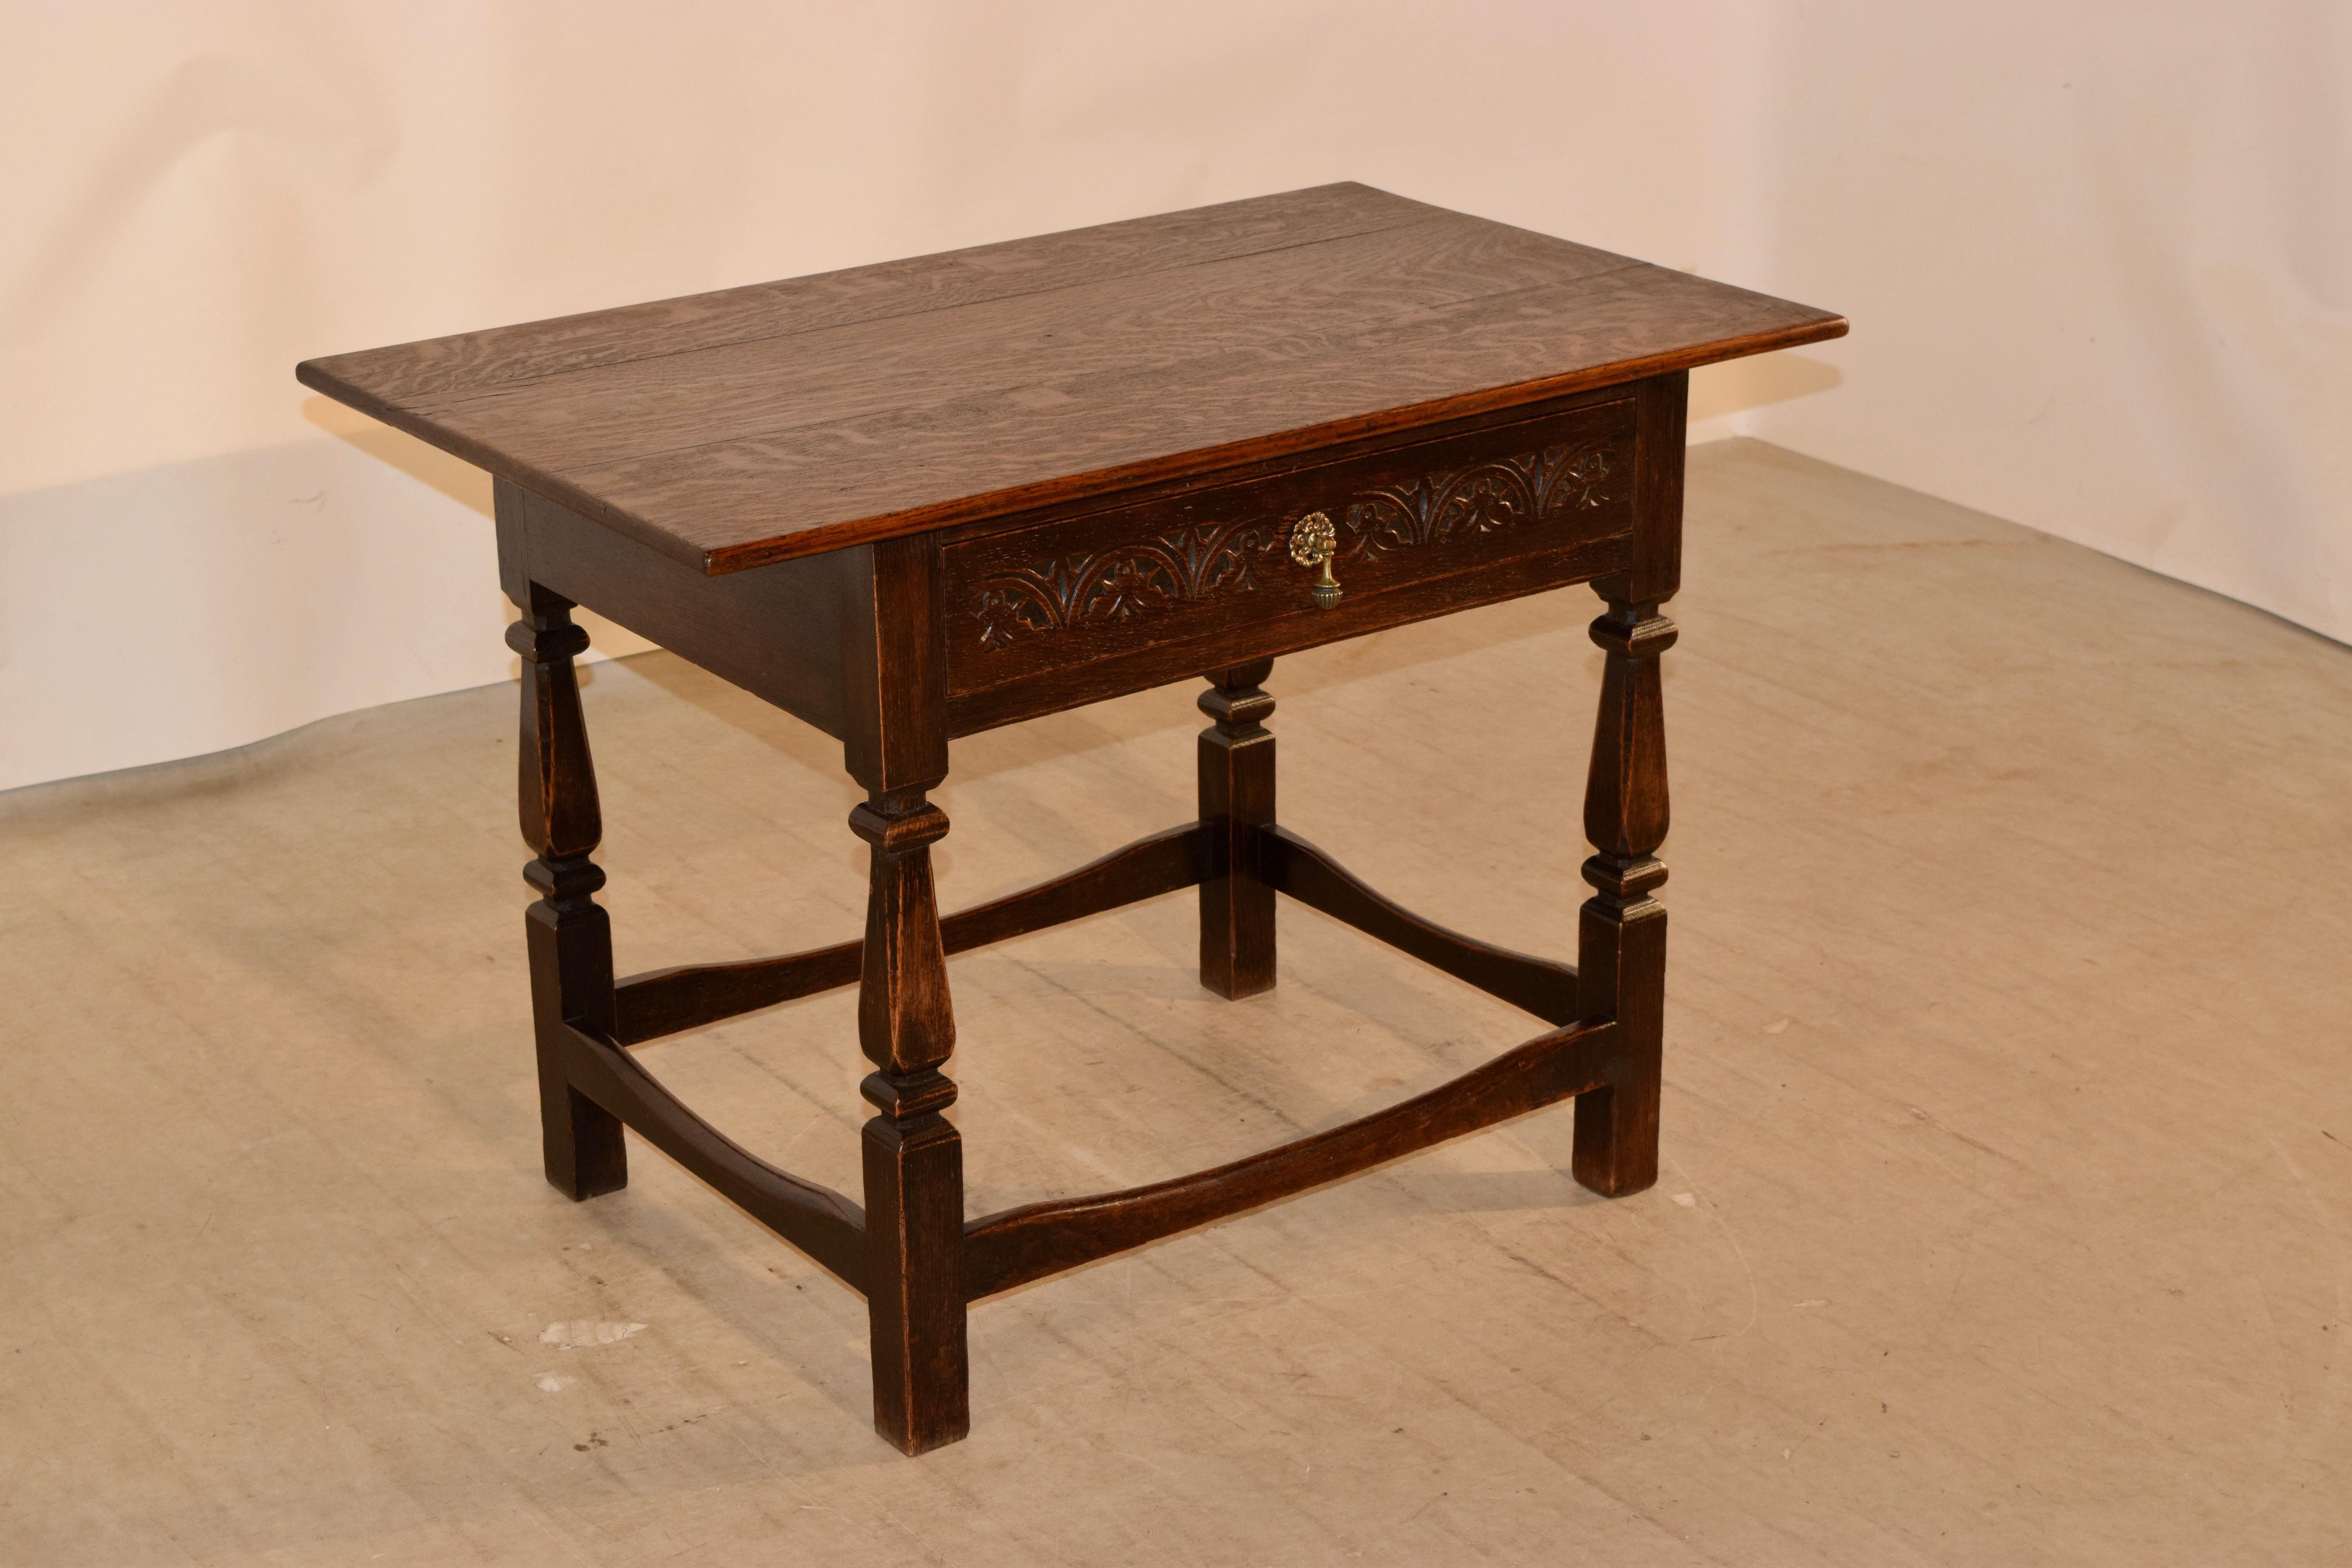 19th century oak side table from England with a three plank top, following down to a simple apron, containing a single drawer in the front with a hand carved decorated drawer front. The legs are hand-turned and are a very unusual squared off turned